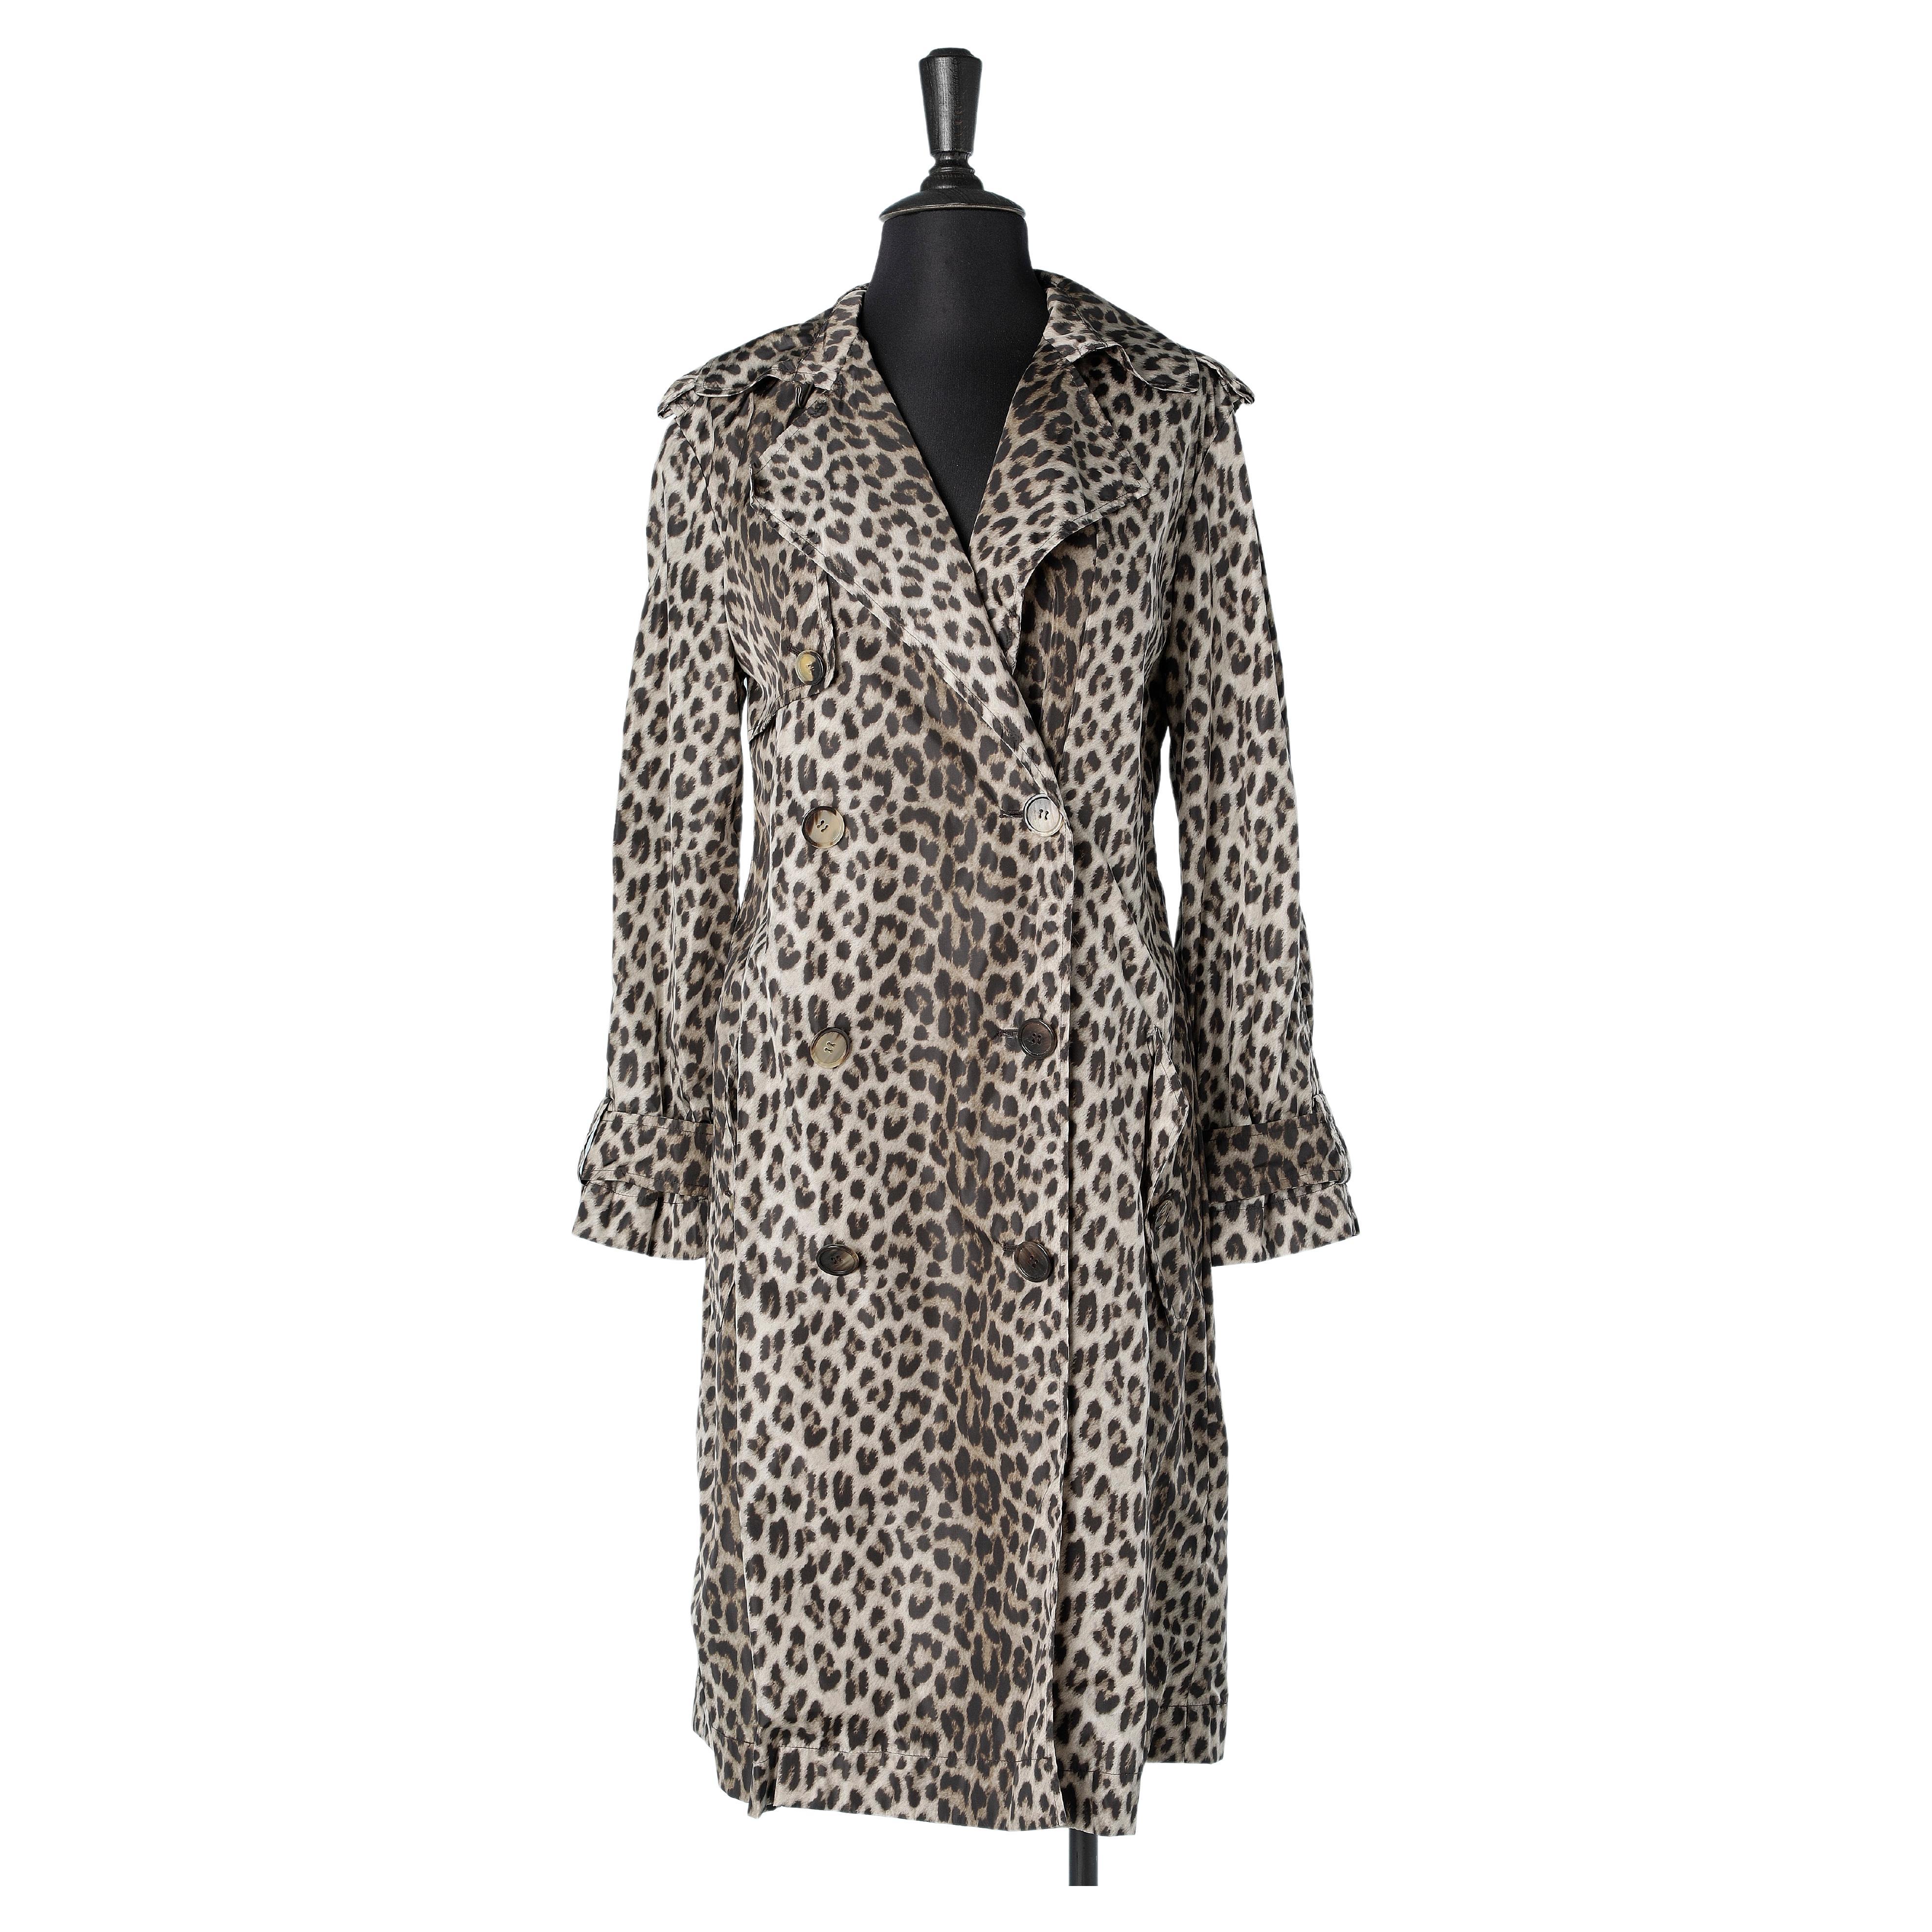 Nylon leopard printed double-breasted trench-coat Lanvin by Alber Elbaz 2010 For Sale